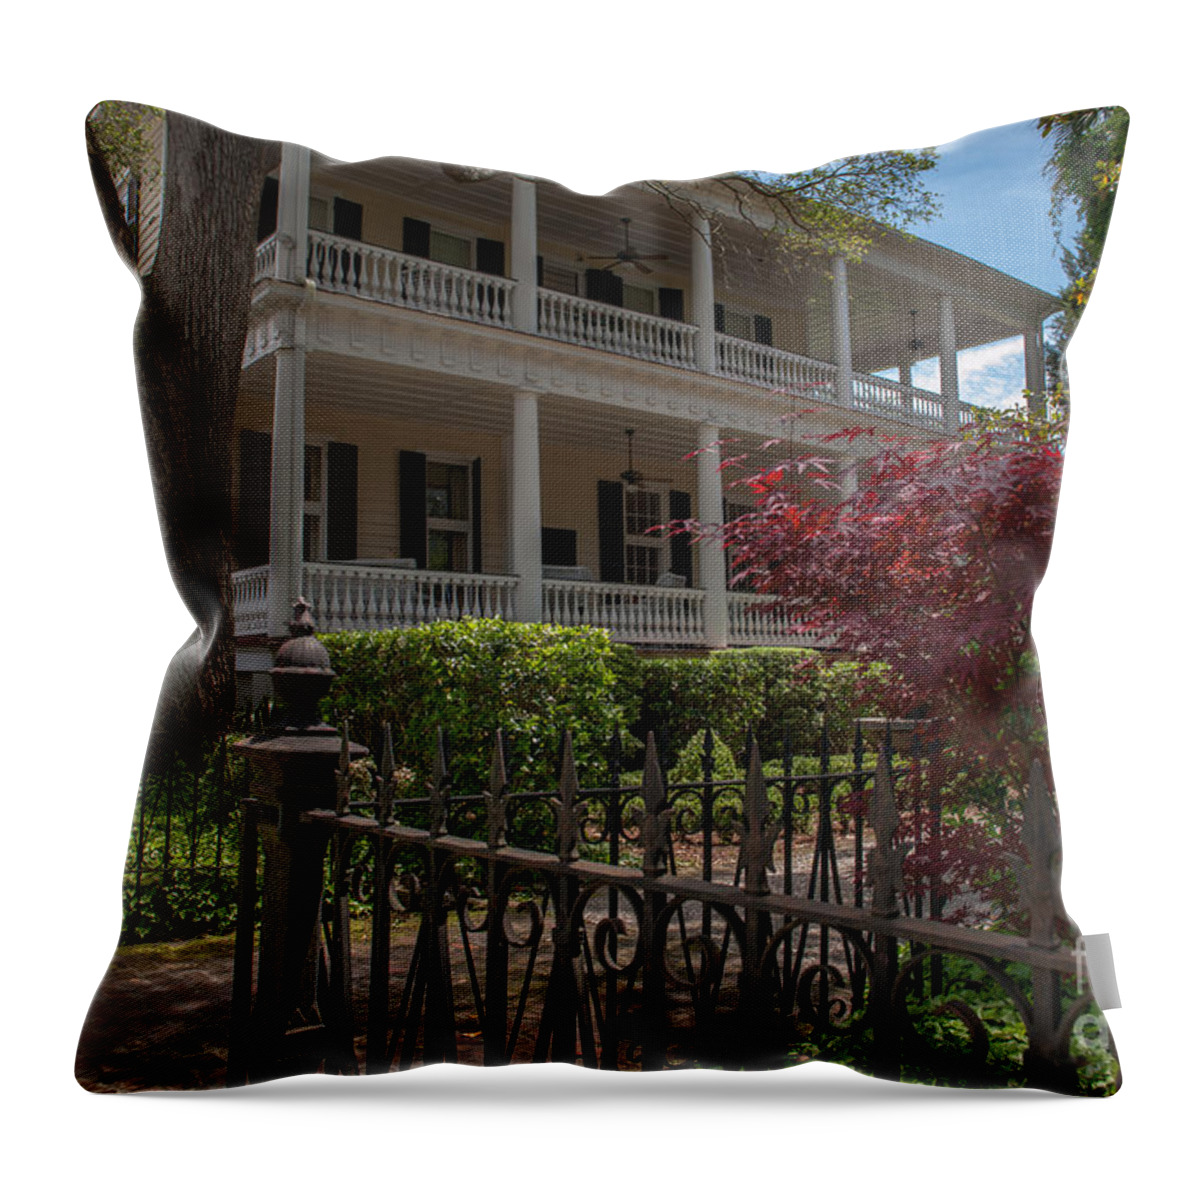 The Governor's House Inn Throw Pillow featuring the photograph The Governors House Inn by Dale Powell